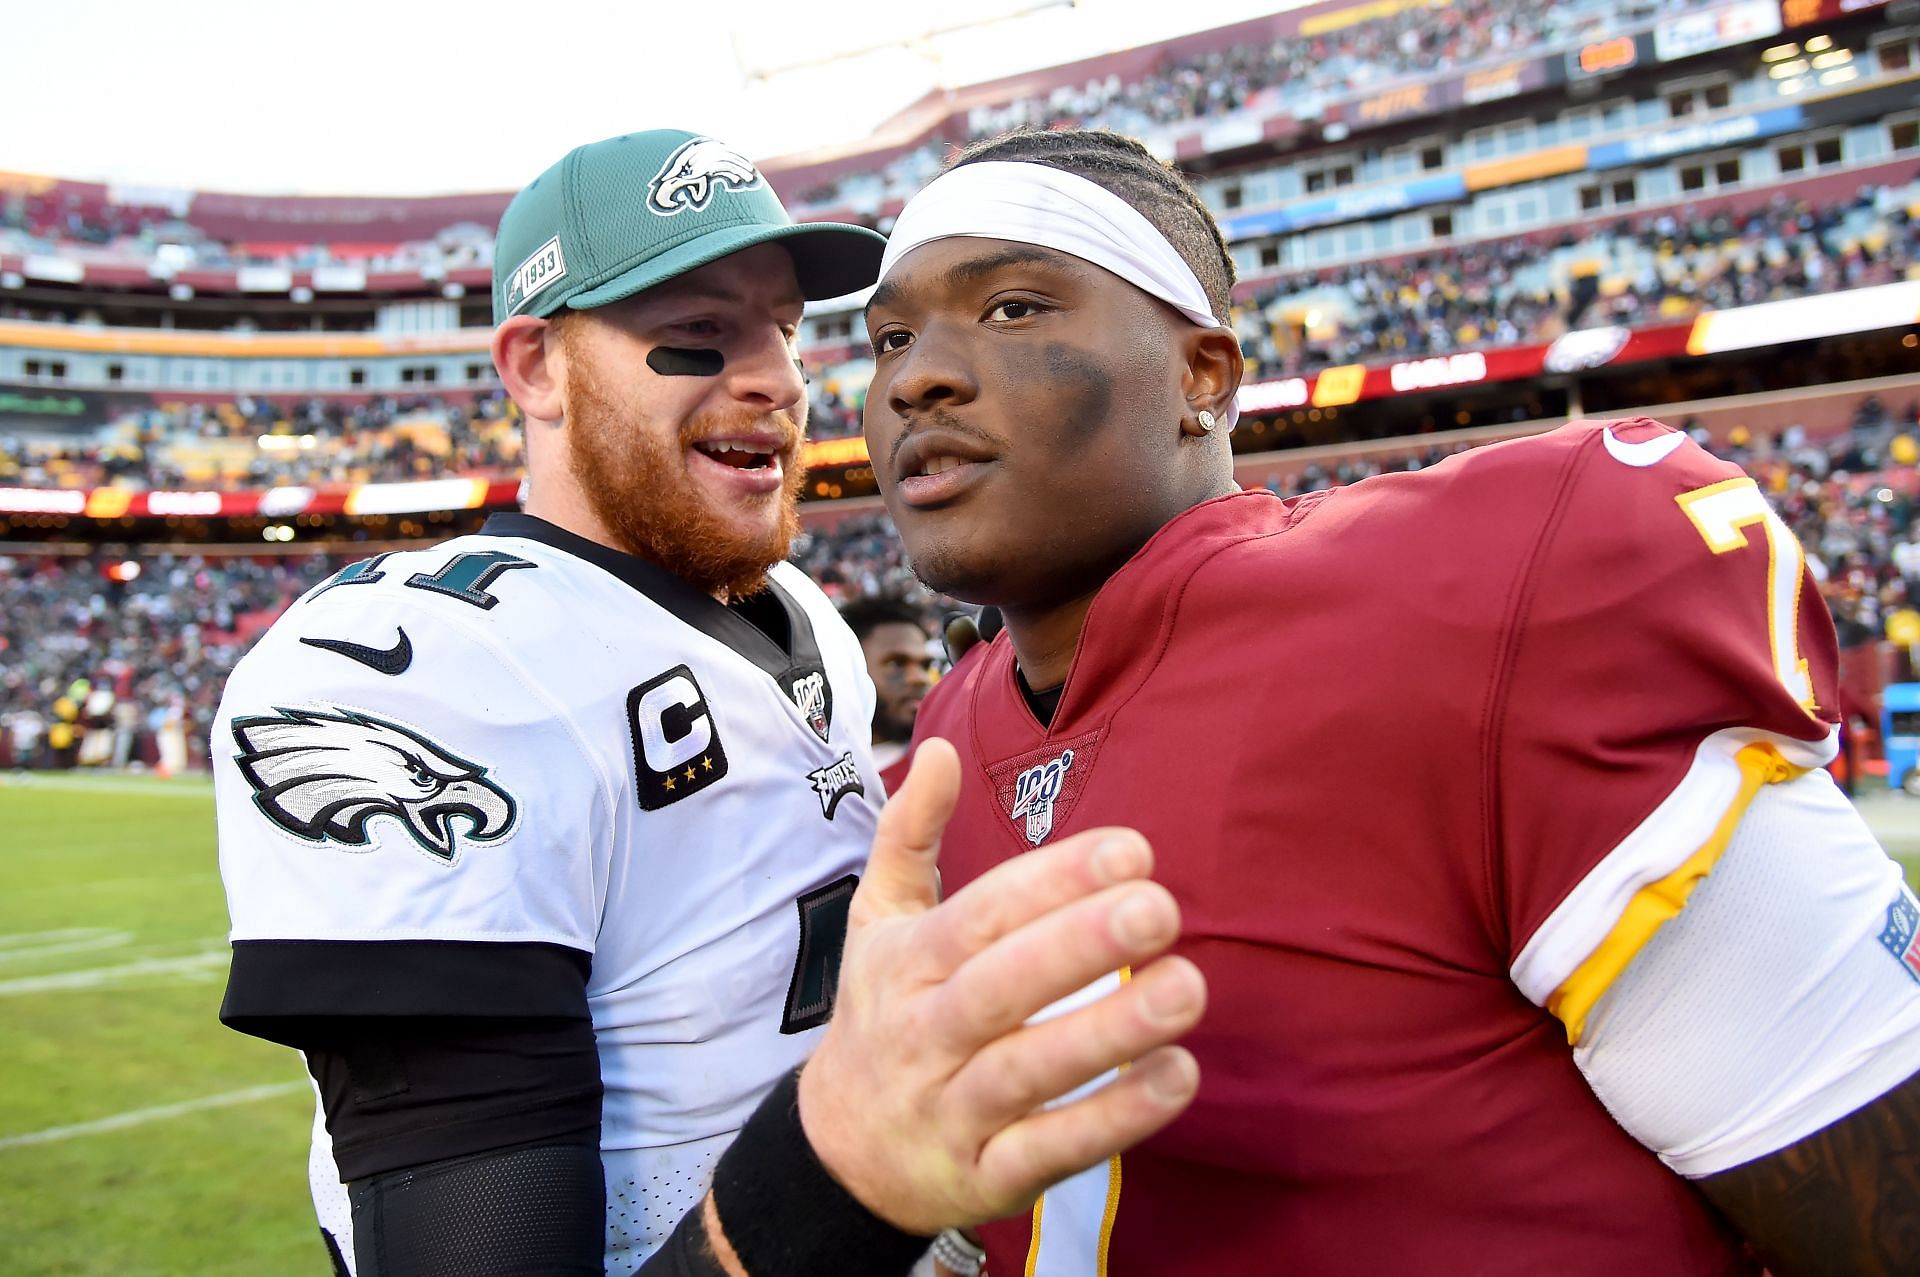 Carson Wentz and Dwayne Haskins shake hands after a game